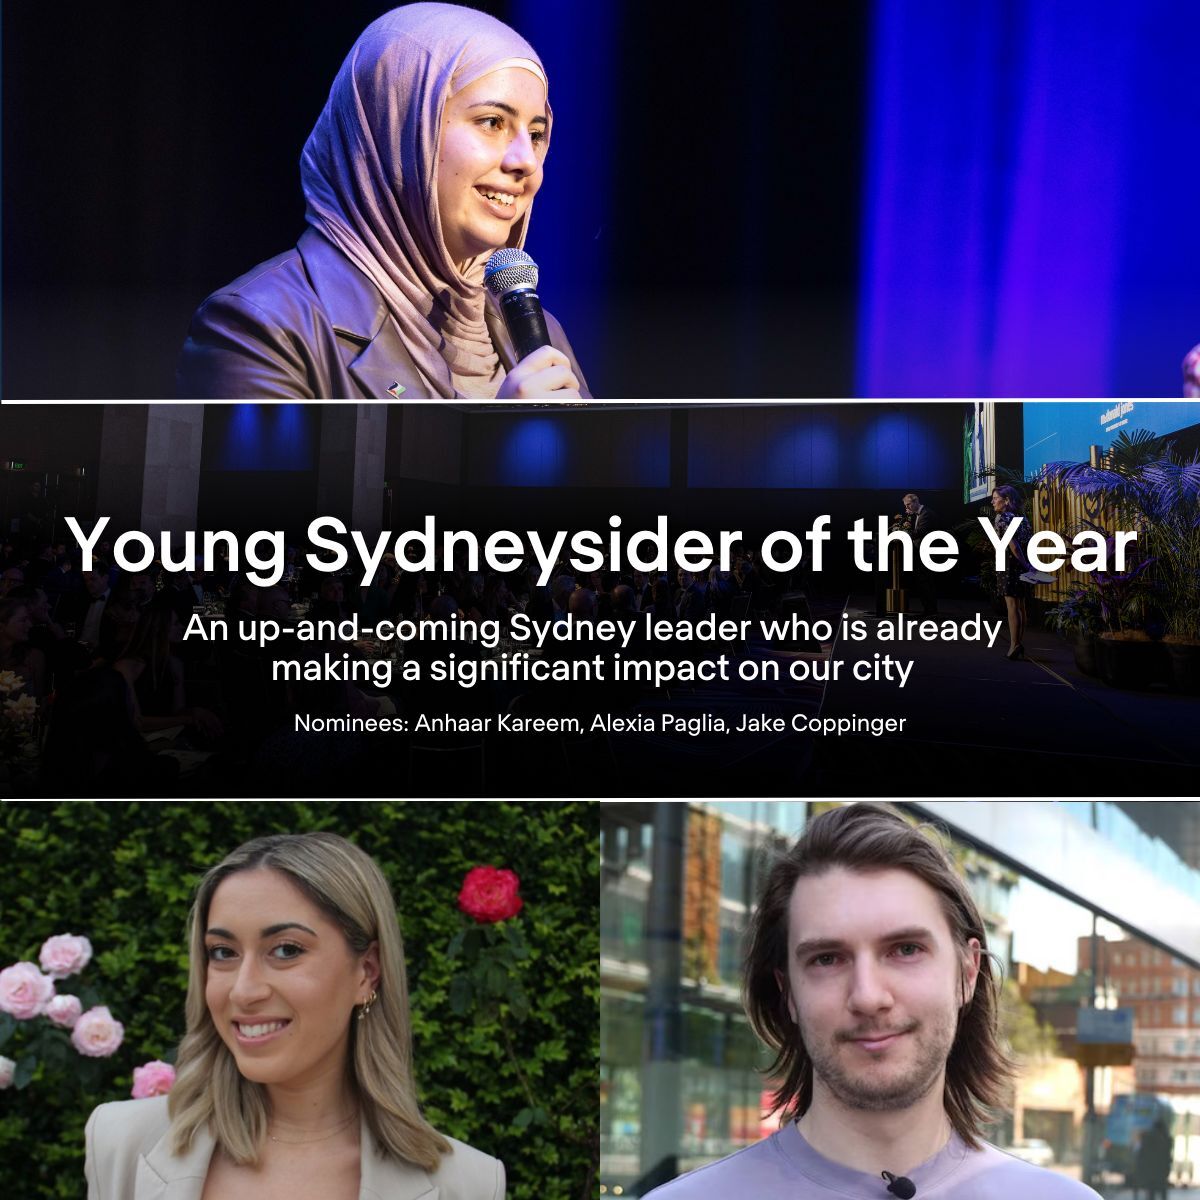 Jake Coppinger nominated for Young Sydneysider of the Year Award (Committee for Sydney)